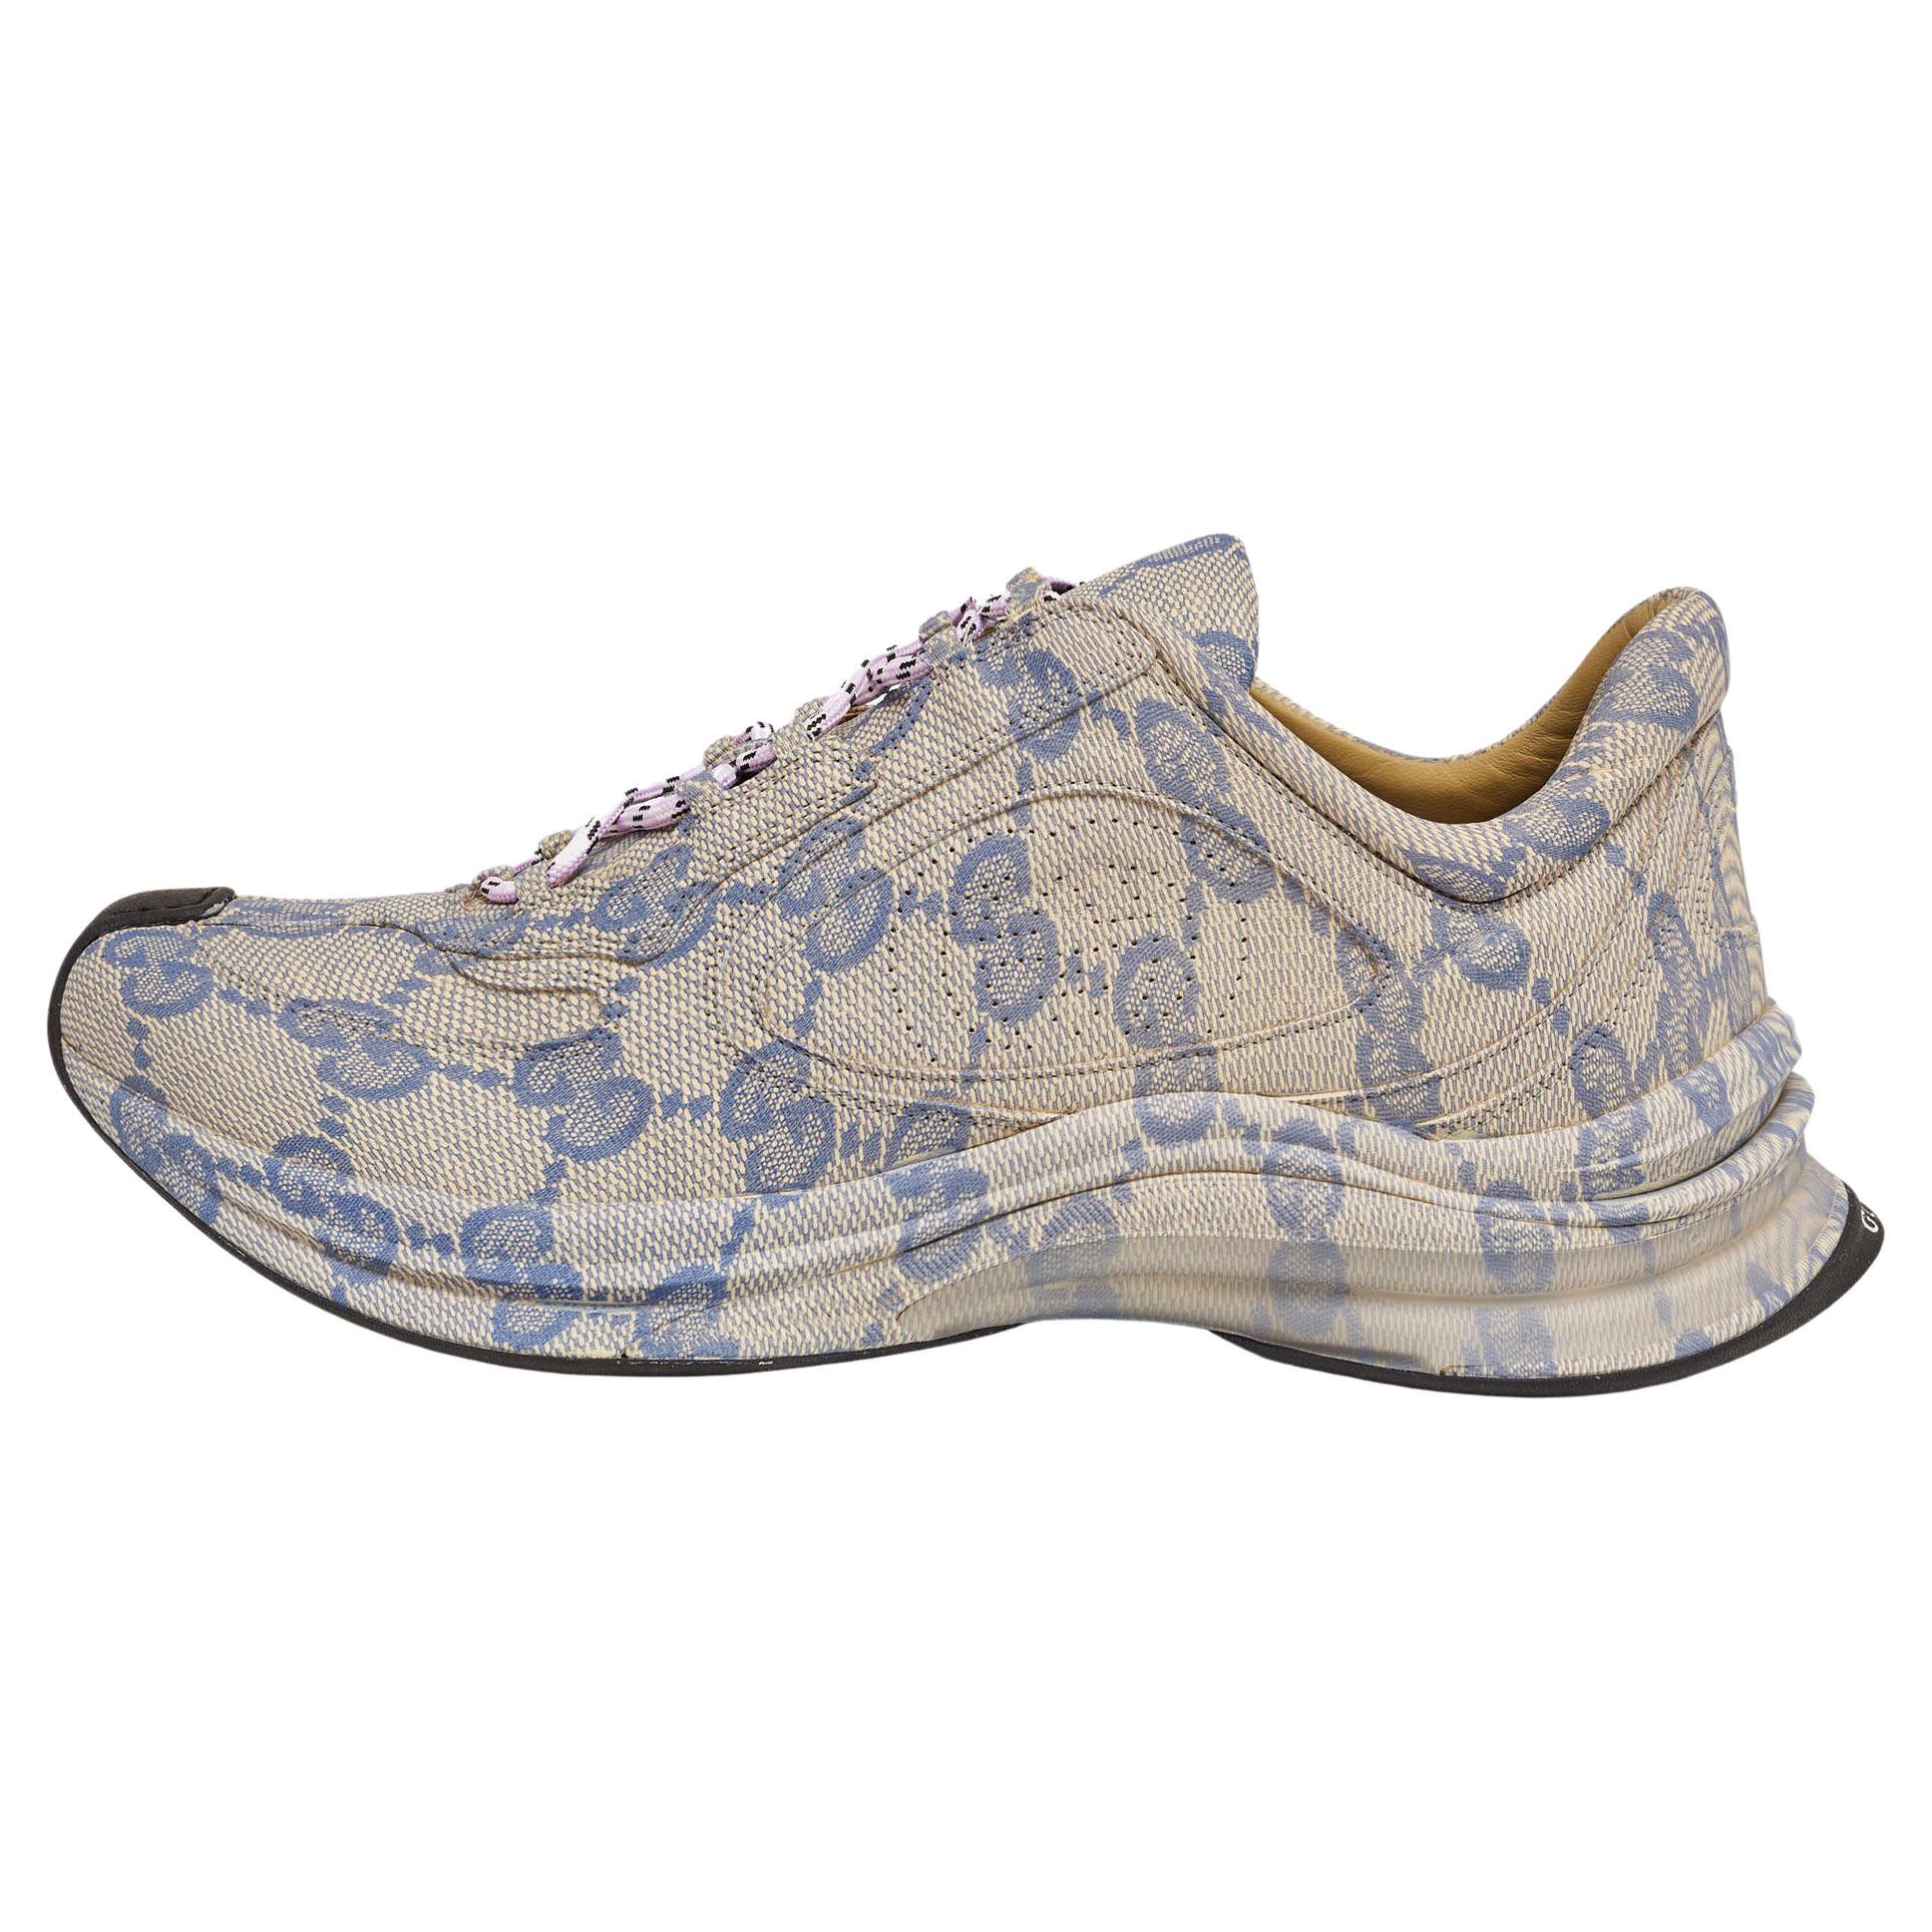 Gucci Beige/Blue GG Printed Leather Run Sneakers Size 44